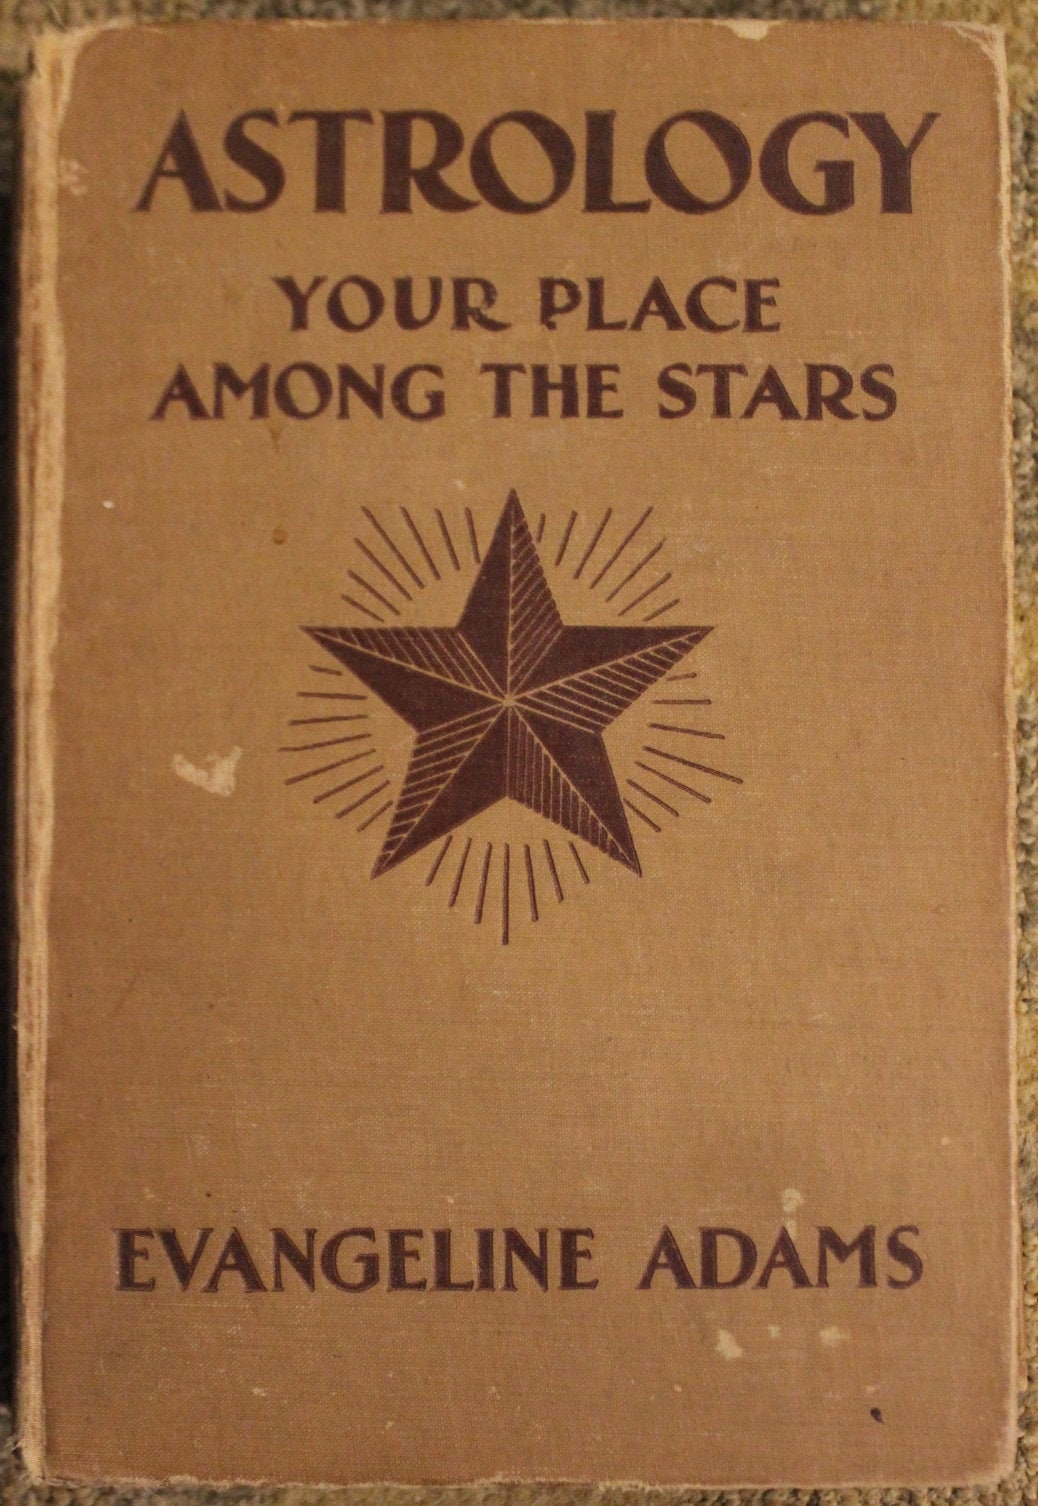 Astrology Your Place Among the Stars Evangeline Adams